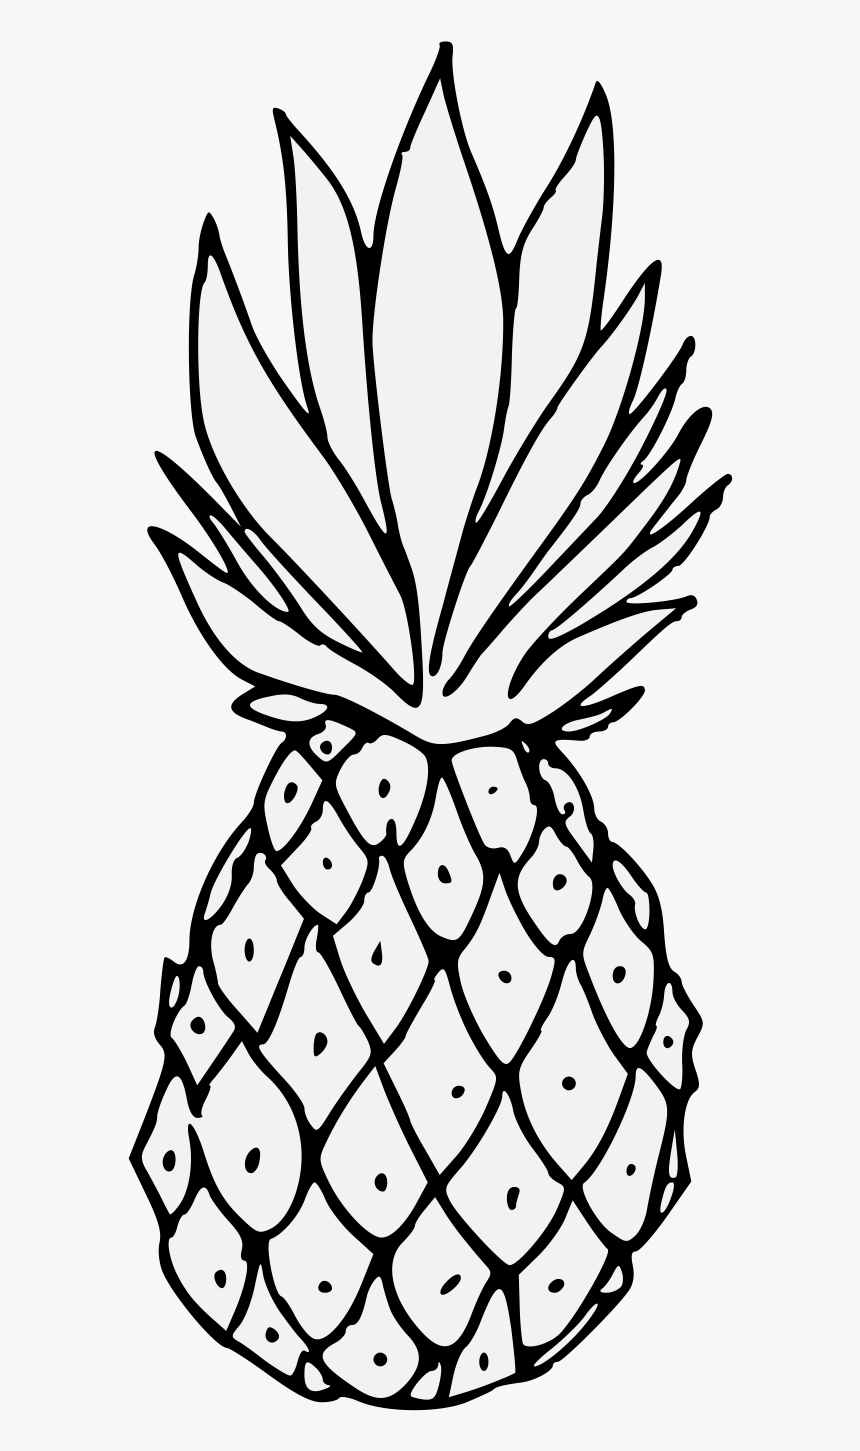 Pineapple Drawing Cute Vector Images (over 3,400)